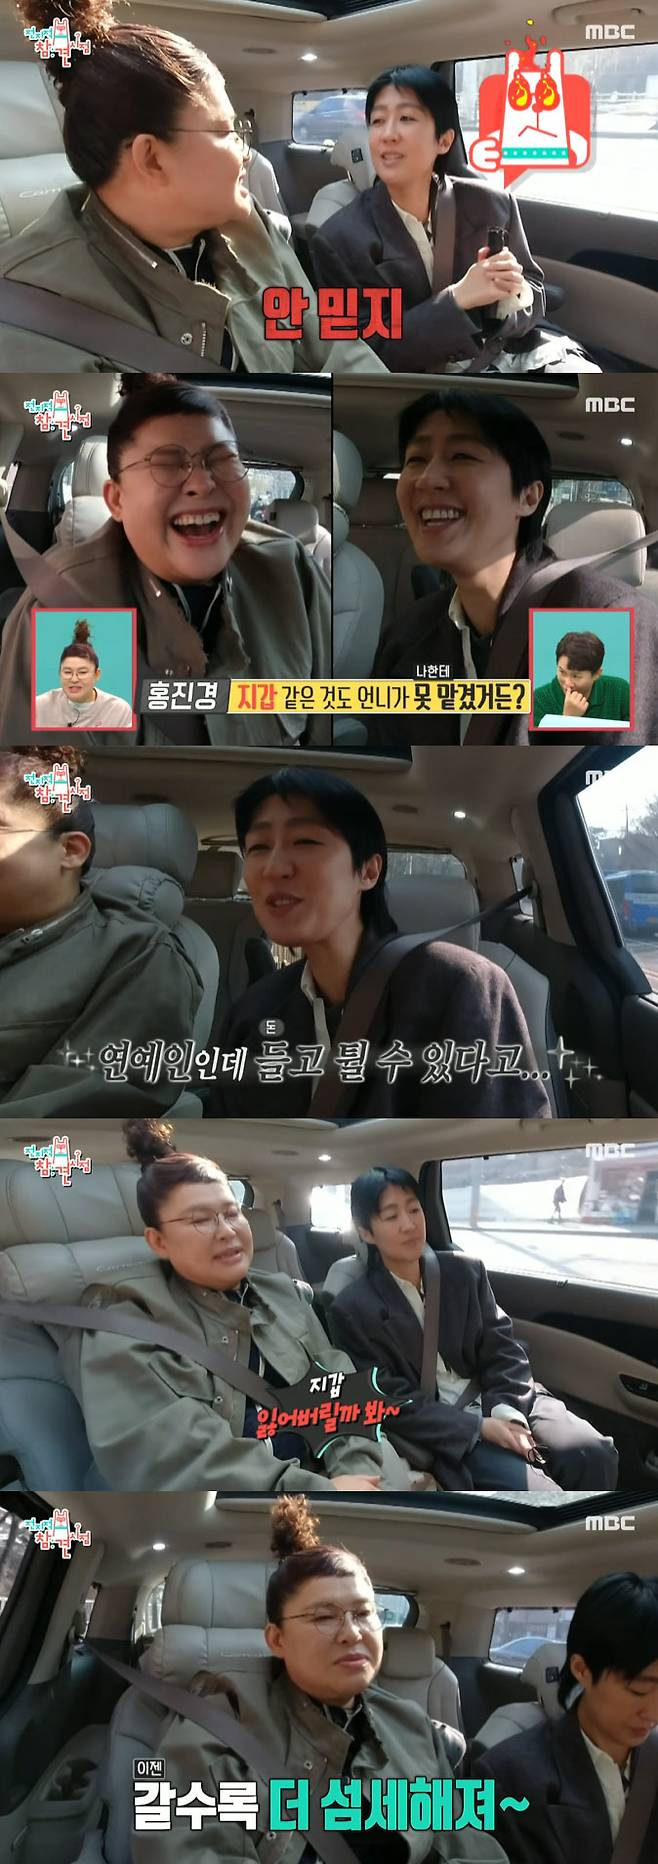 In the 196th MBC entertainment program Point of Omniscient Interfere (hereinafter referred to as Point of Omniscient Interfere) broadcasted on the 23rd, the news of the entertainment world Ju Woo-jae and the special day of Lee Young-ja, who traveled to Jeju Island with Jin-kyoong Hong,Joo Jae-jae, famous for his so-called No-taste food that forced the viewer to diet, unveiled a shocking news human routine on this day.Ju-jae, who chewed a donut mouth very slowly and swallowed it, surprised everyone. So Ju-jae said, Sometimes the black dragon wakes up in me.When it comes to awakening, two (donuts) are eaten, which has led to the MCs bursting into bread: Juu Jaes amazing routine was not the end here, on a warm April spring day, with jumpers and knits.Joo Woo-jae, who has a cold water in his hands, focused his attention on sleeping on the electric plate.After that, Joo-jae and his manager headed to the new office of YG Entertainment, a company that is known to be delicious because the restaurant that the humane Joo-jae loves is the YG cafeteria.In addition, the new YG building was unveiled for the first time on the air, and not only the huge size, but also the facilities such as the gym and billiard halls were attracting attention.Before arriving at the office, Joo Woo-jae, who was bluffing as a gourmet, arrived at the restaurant and moved a strand of herbs, two sausages, a piece of squid, and a piece of kim to the food plate.Joo Jae, who is also famous for his boyfriend look, started styling the manager, Point of Omniscient Interfere youngest PD.In particular, Joo Jae-jae amplified the Crown Prince Sado by saying that he would complement it with an overfit for the youngest PD of Point of Omniscient Interfere.Ju Woo-jae pointed to the youngest PDs pants and said, What are these pants?, and the youngest PD gave an unexpected answer, saying, My father gave me a gift for my job., turning the scene into a laughing sea. Uggly twists (?)At the end, Joo Jae succeeded in transforming his youngest PD into a hip style and impressed him.Lee Young-ja has embarked on a trip to Jeju Island with steamy best friend Jin-kyeong Hong.Before meeting with Jin-kyeong Hong, Lee Young-ja recalled memories of the past, and he said, Jin-kyung bought me a table in the old days because his hands were big.When I talked to the manager Song, I was glad to see Jin-kyoong Hong, who arrived at Jin-kyoong Hong. Lee Young-ja, who was in advance, and his daughter Sean Gelael.In particular, he joked that he would give Sean Gelael pocket money and I came with a house document to give money and laughed.Jin-kyeong Hong then got into the Lee Young-ja car with his manager.Throughout the way to the airport, Jin-kyeong Hong told Lee Young-ja about the schedules to be made at Jeju Island.Jin-kyeong Hong expressed confidence, saying, Just leave it to me comfortably - leave your body, time, everything.But Lee Young-ja asked the response that he was not satisfied with, Do you believe me? And Lee Young-ja answered I do not believe honestly and laughed.Jin-kyeong Hong said, Isnt it time to believe now? Until 15 years, my sister doubted me a lot. I could not leave my wallet to me.I thought I was an entertainer and I could carry it. Lee Young-ja explained, I was afraid I would lose it. Jin-kyeong Hong did not praise it at that time.But now it is more and more delicate, he added.The two of them were always tit-for-tat after arriving at Jeju Island, causing a big laugh, while Lee Young-ja studied Jeju Island No. 1 Haenam (?), and Jin-kyeong Hong did not accept it, saying, Is not it going to the restaurant? After all, the two people arrived at the seafood restaurant operated by Haenam.My sister is here, great, great, the best of the brutes Ive ever had, said Jin-kyeong Hong, who was surprised to say, Ive had a great time.Lee Young-ja soaked up the storm by sauced sea urchin eggs on stoned crabs and octopus lodgings.Lee Young-jas later version of The first mouth is sea-flavored, the end is sweet has stimulated viewers salivary glands.In the meantime, Jin-kyoong Hong encouraged Lee Young-ja to learn something, saying, Lets go to a place like my sisters hometown in the beginning, where my sister always dreamed.Turns out Lee Young-ja and Jin-kyeong Hong were headed for the house of the sea girl.Lee Young-ja, who had been late on the situation, jumped to the fact that he had to change into a diving suit, saying, There will be no size for me.Jin-kyeong Hong said, My sister is so tired now, listen to the sound of coral reefs.Changed into a sea dress over 40 minutes, Lee Young-ja even danced and emanated a high tension.Following this, Lee Young-ja obtained without hesitation and then strolled through the Jeju Island blue sea like a water-meat.Lee Young-ja manager Song said, My senior was really beautiful in Lee Young-jas swimming ability.Lee Young-ja, who has a skin scuba certificate, has revealed the shape of a mermaid by swimming in the sea.In addition, Lee Young-ja was surprised by the hawks eyes, and Jin-kyeong Hong also succeeded in harvesting seaweed, sora, and smallpox.The healing of the two people in the background of beautiful nature gave the viewers a cool impression and surrogate satisfaction.According to Nielsen Korea, the 196th Point of Omniscient Interfere ranked first among the entertainment programs in the same time zone, with 4.4% nationwide and 5.0% in the metropolitan area.The highest audience rating per minute rose to 6.2%; the 2049 audience rating, the main indicator of advertising officials, was 2.3%, the highest among entertainment programs broadcast at the same time.Next week, Lee Young-ja and Jin-kyeong Hongs Jeju Island Healing and actor Bae Jong-ok were announced to appear, raising viewers Crown Prince Sado.MBC Point of Omniscient Interfere is broadcast every Saturday at 11:10 pm.